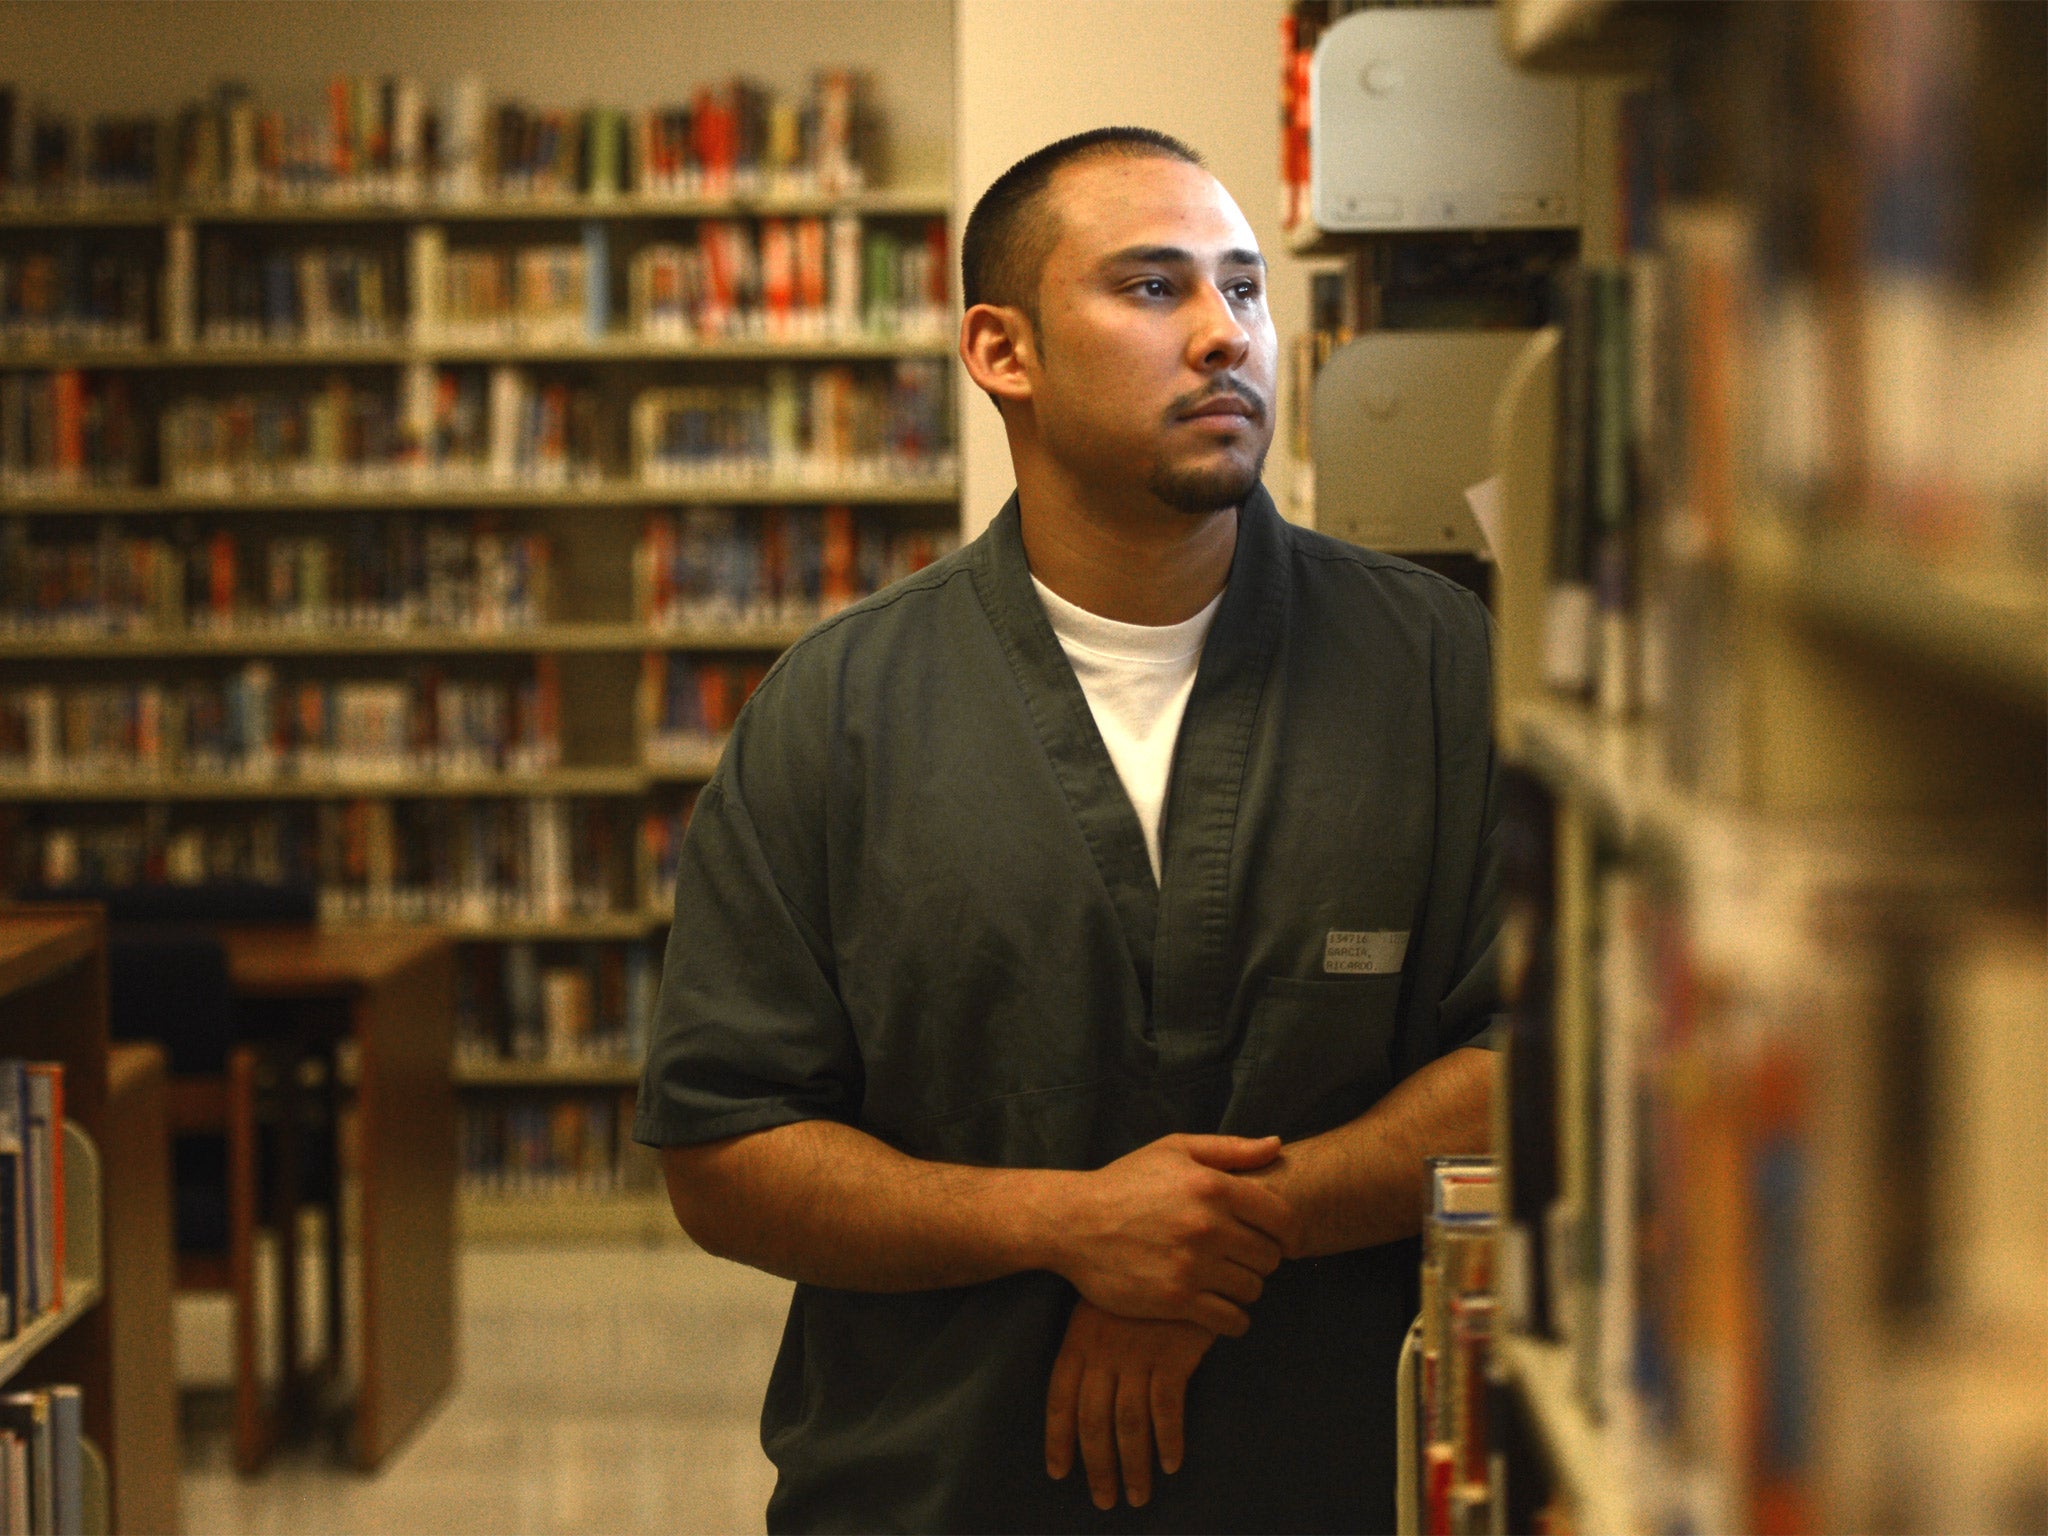 Fresh chapter: The Big Book Share gives prisoners an element of normality